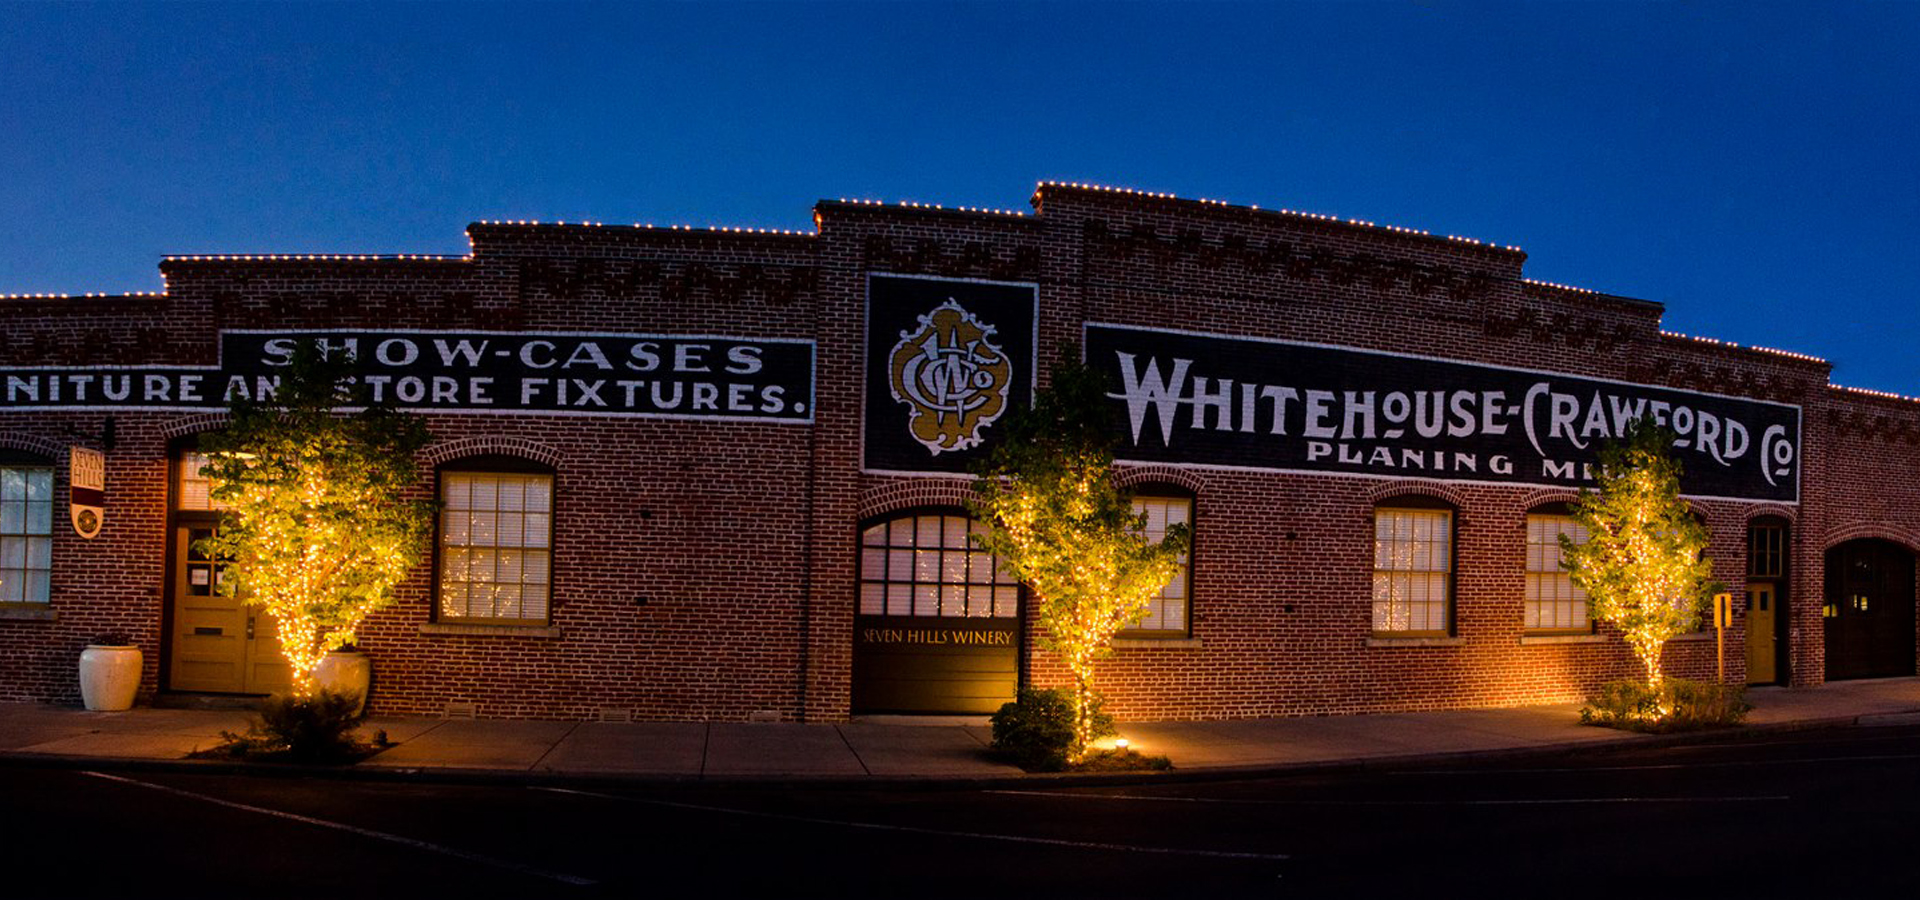 Seven Hills Winery building front at Night